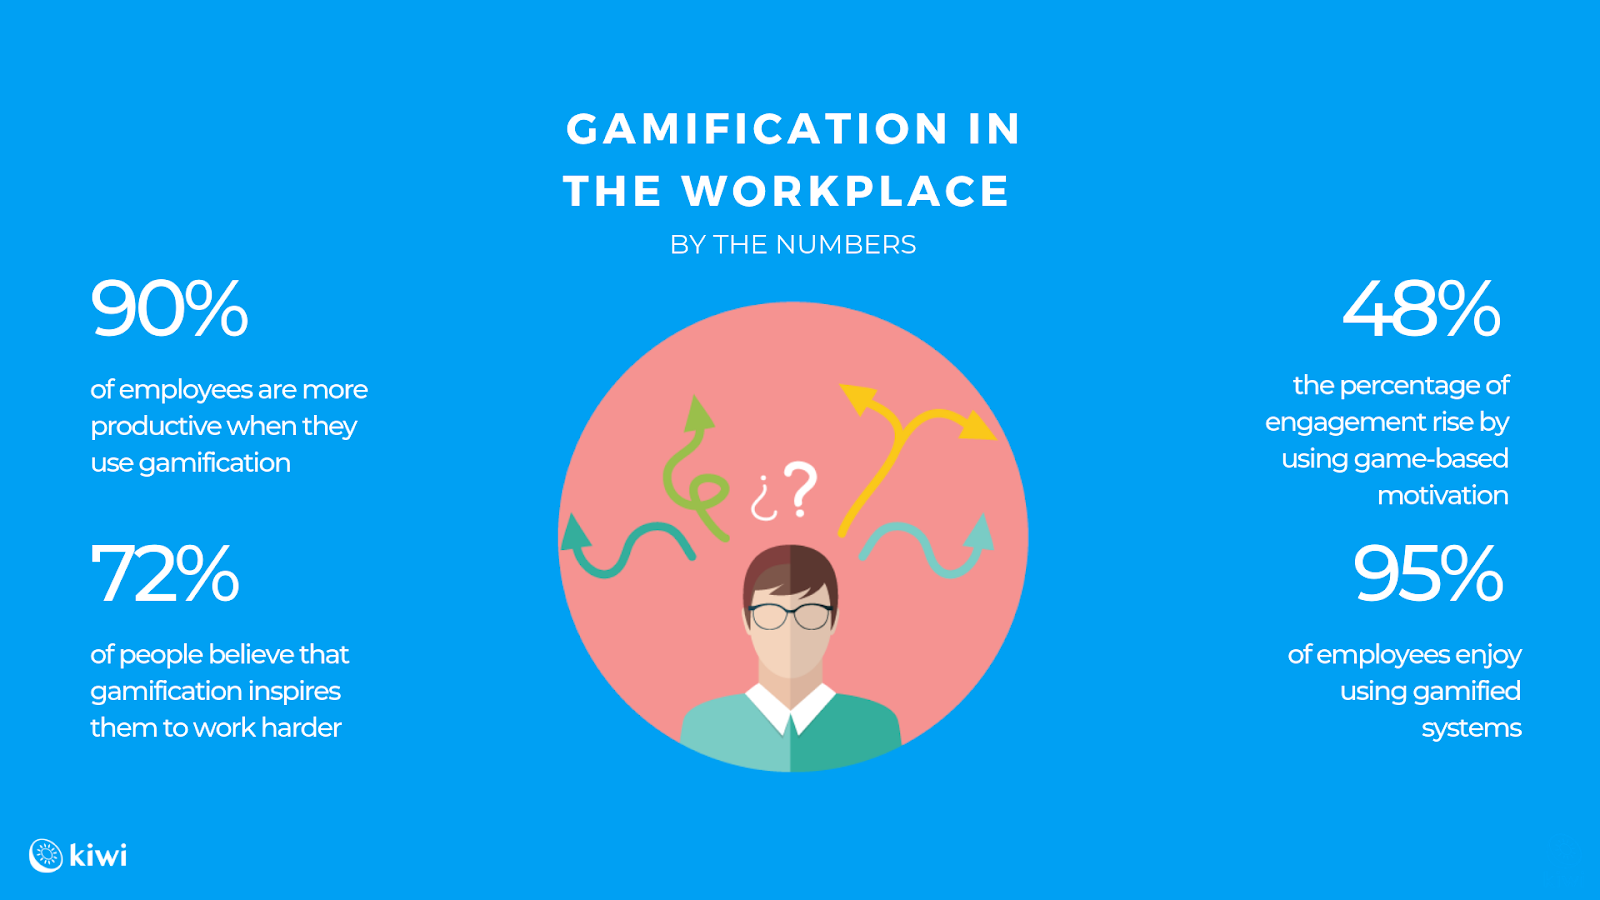 Statistics on gamification in the workplace